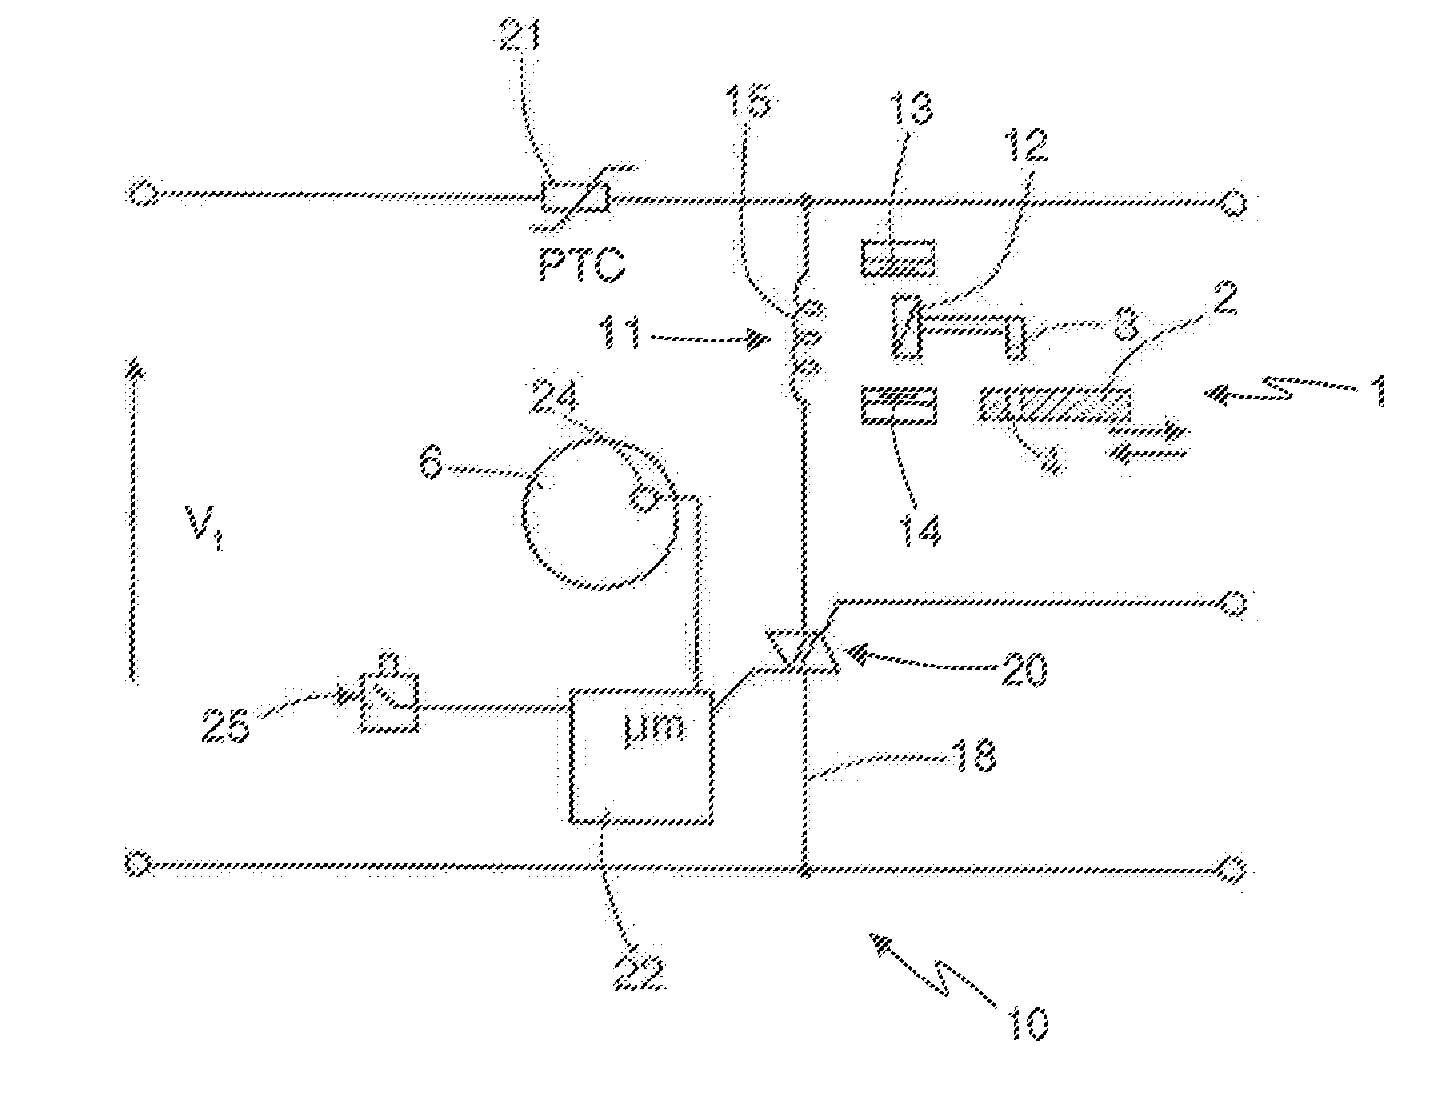 Safety control system for an electromagnetic door lock of an electric household appliance